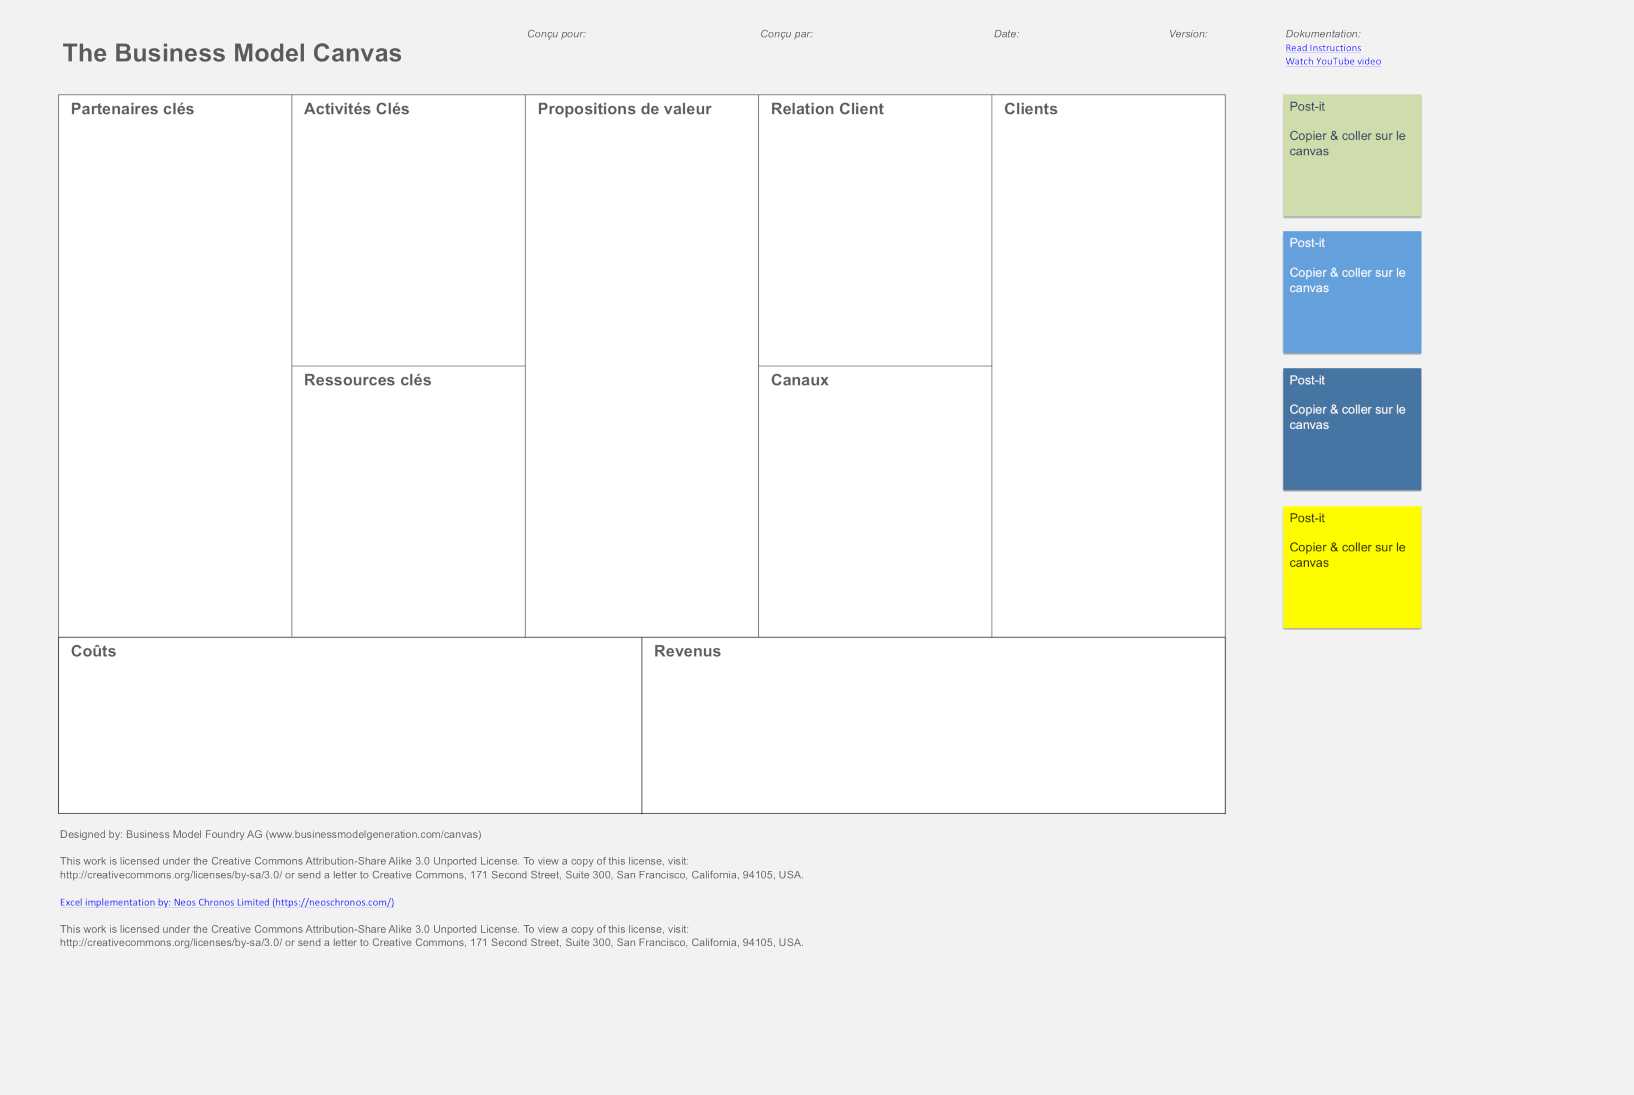 036 Business Model Canvas Template Word Doc Ideas Value Intended For Business Model Canvas Template Word